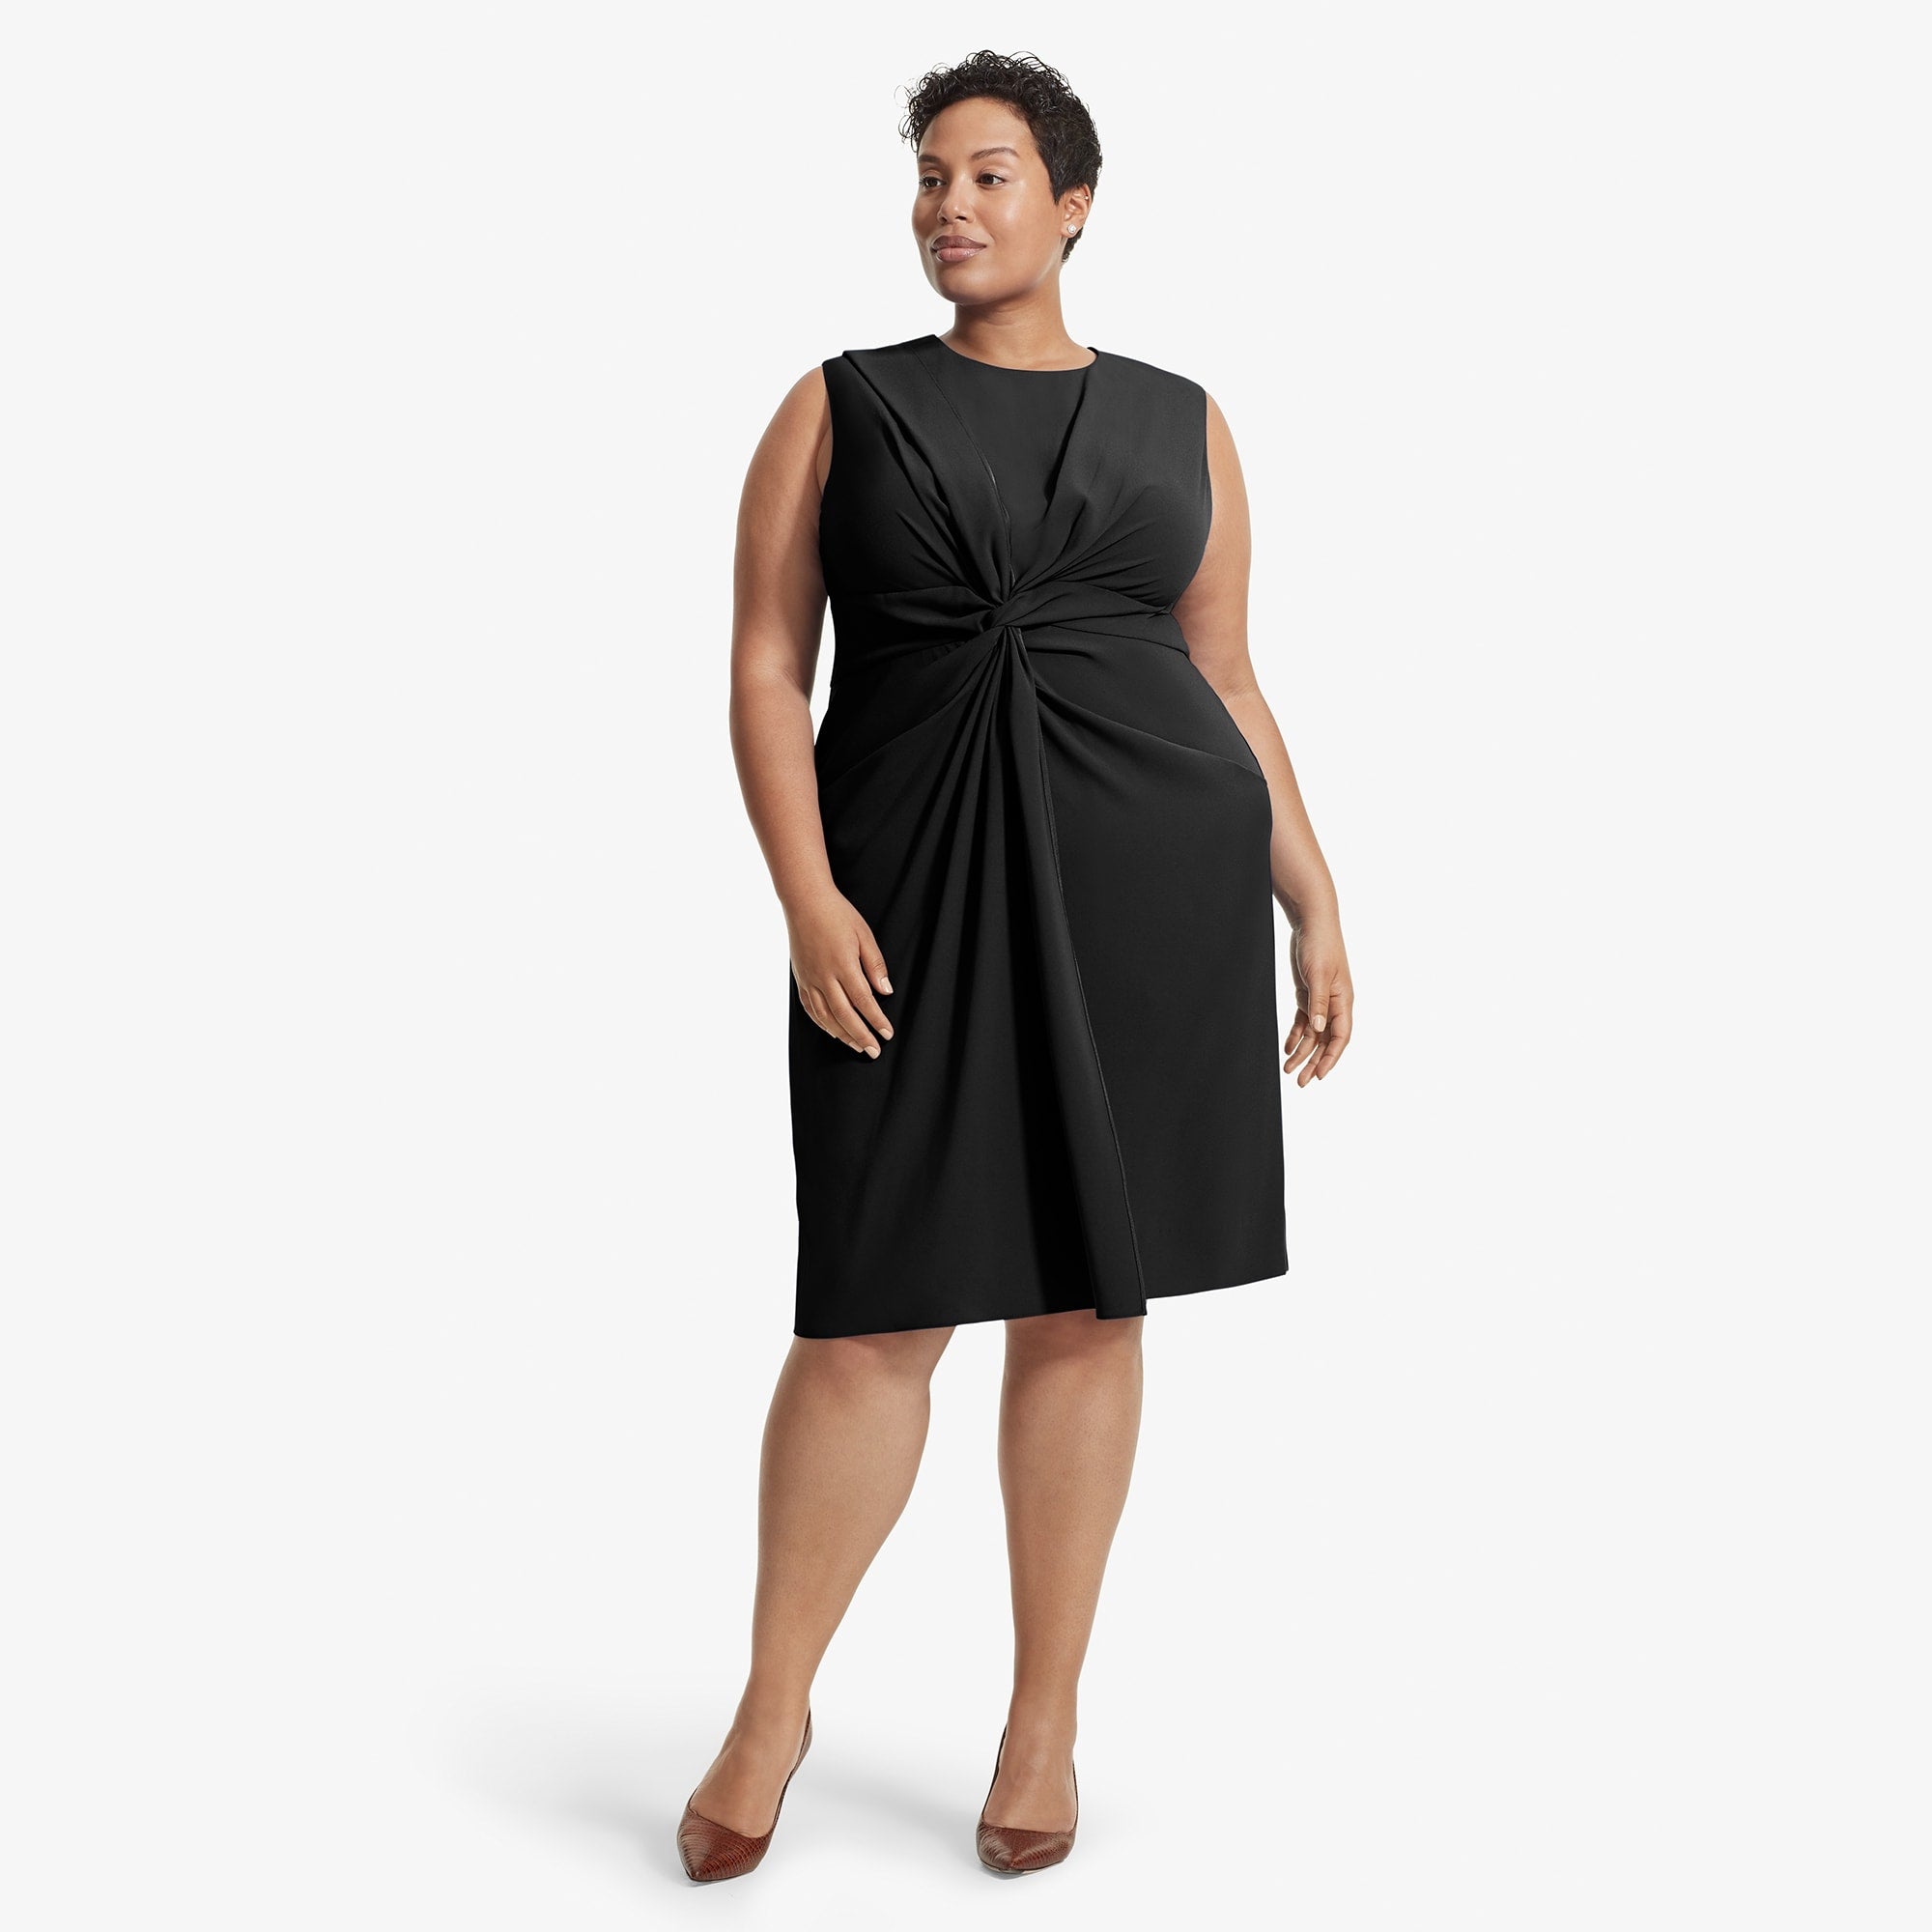 Front image of a woman standing wearing the Taylor dress in Black